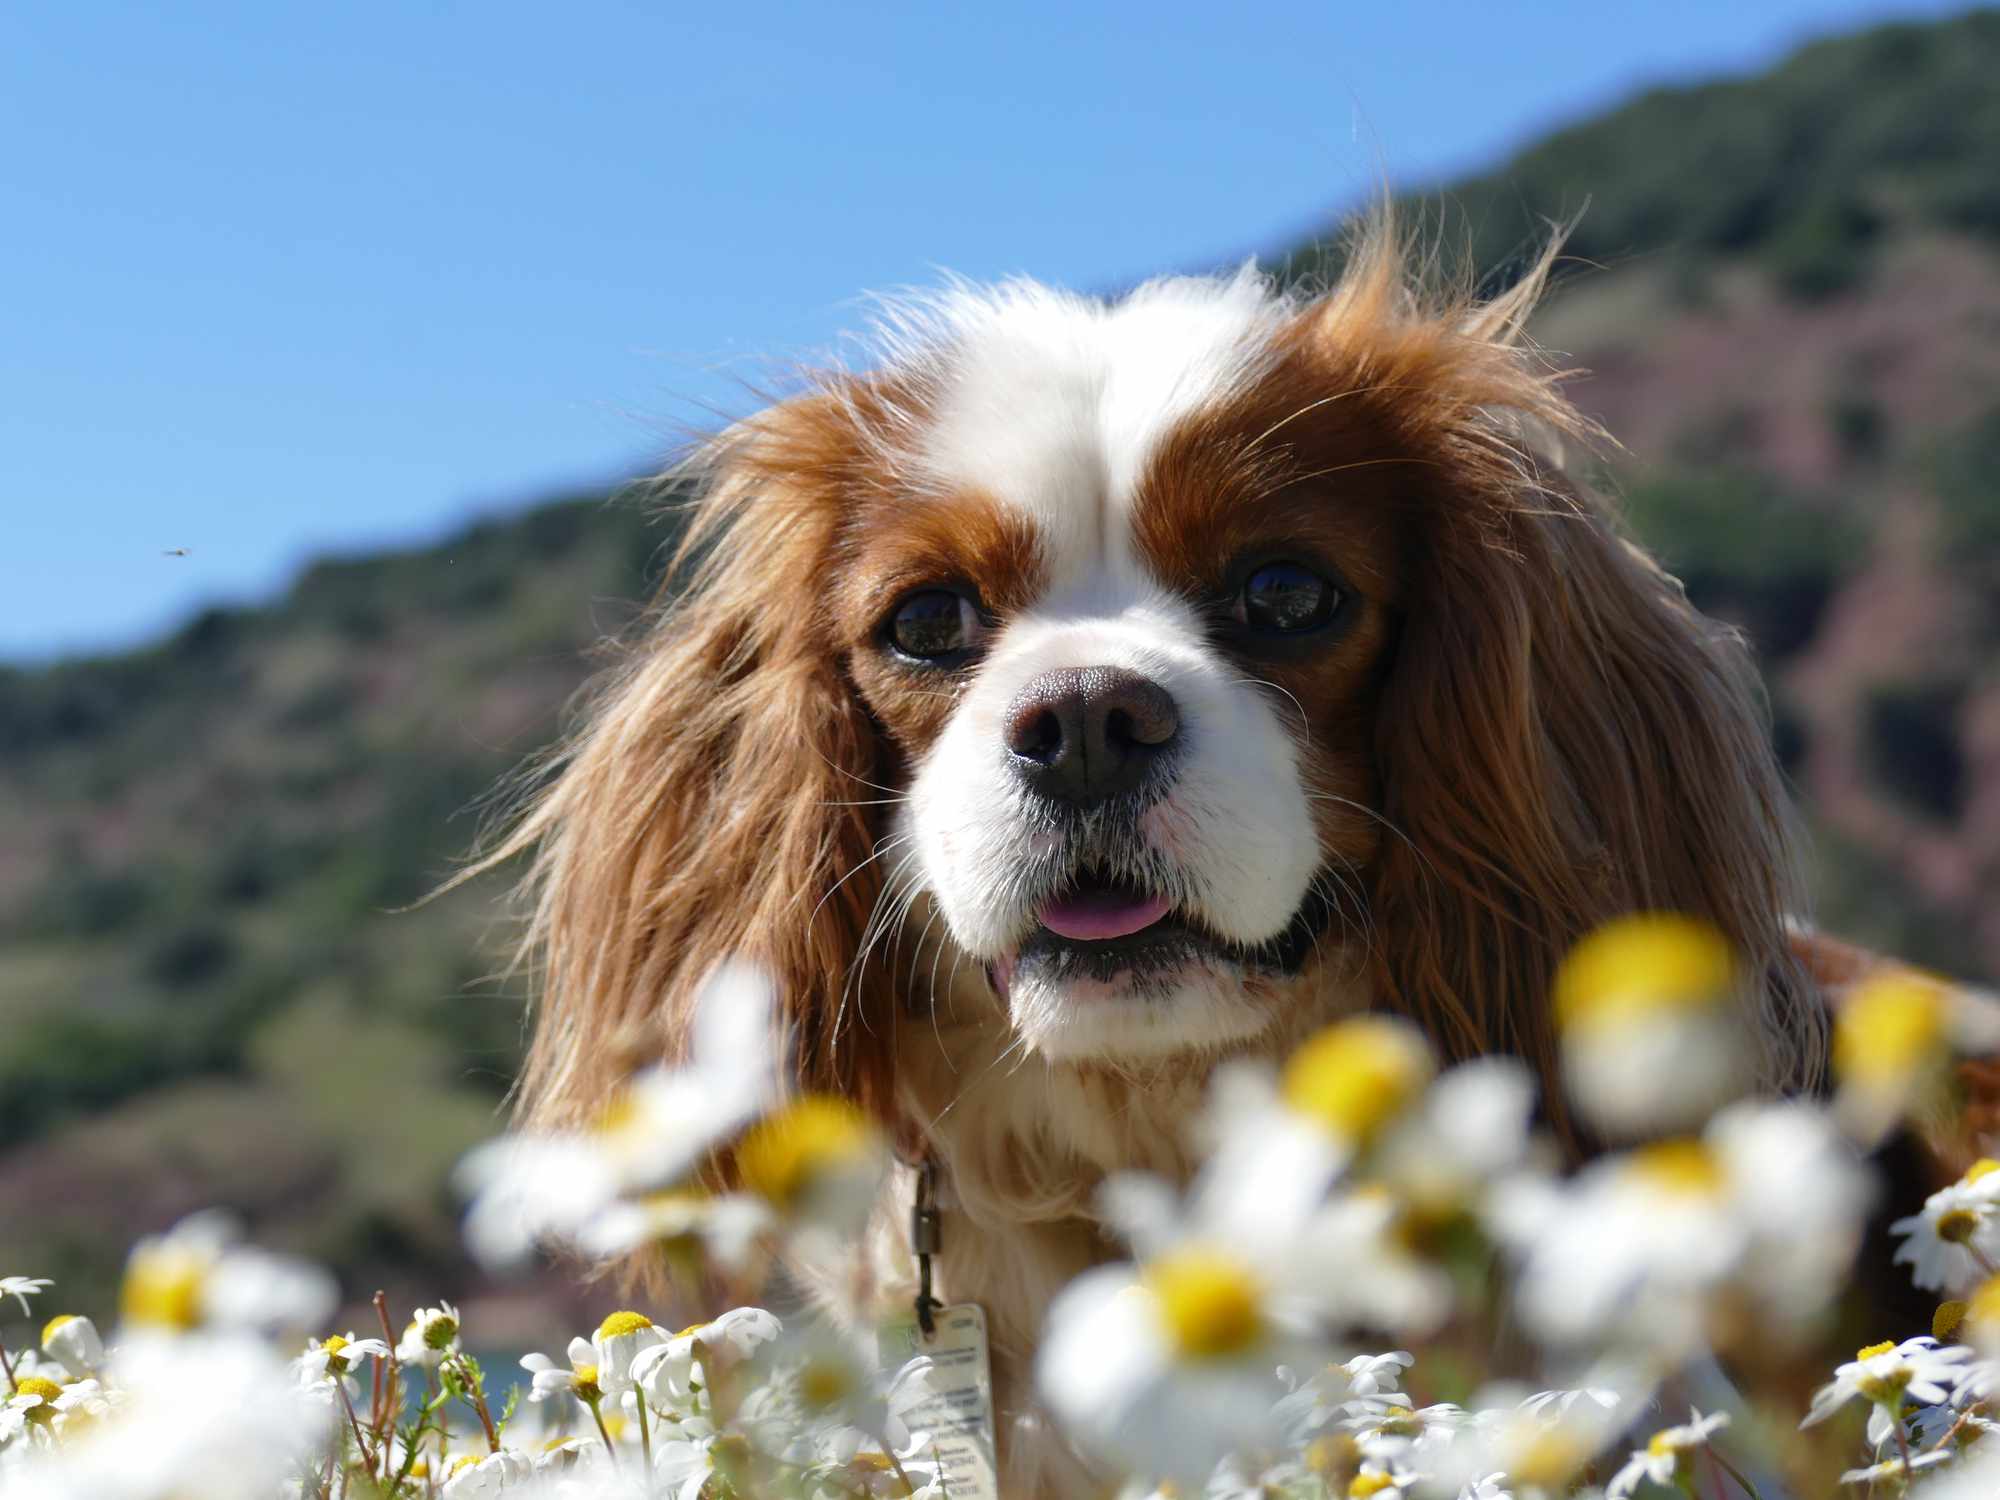 Cavalier King Charles Spaniel in front of some daisies